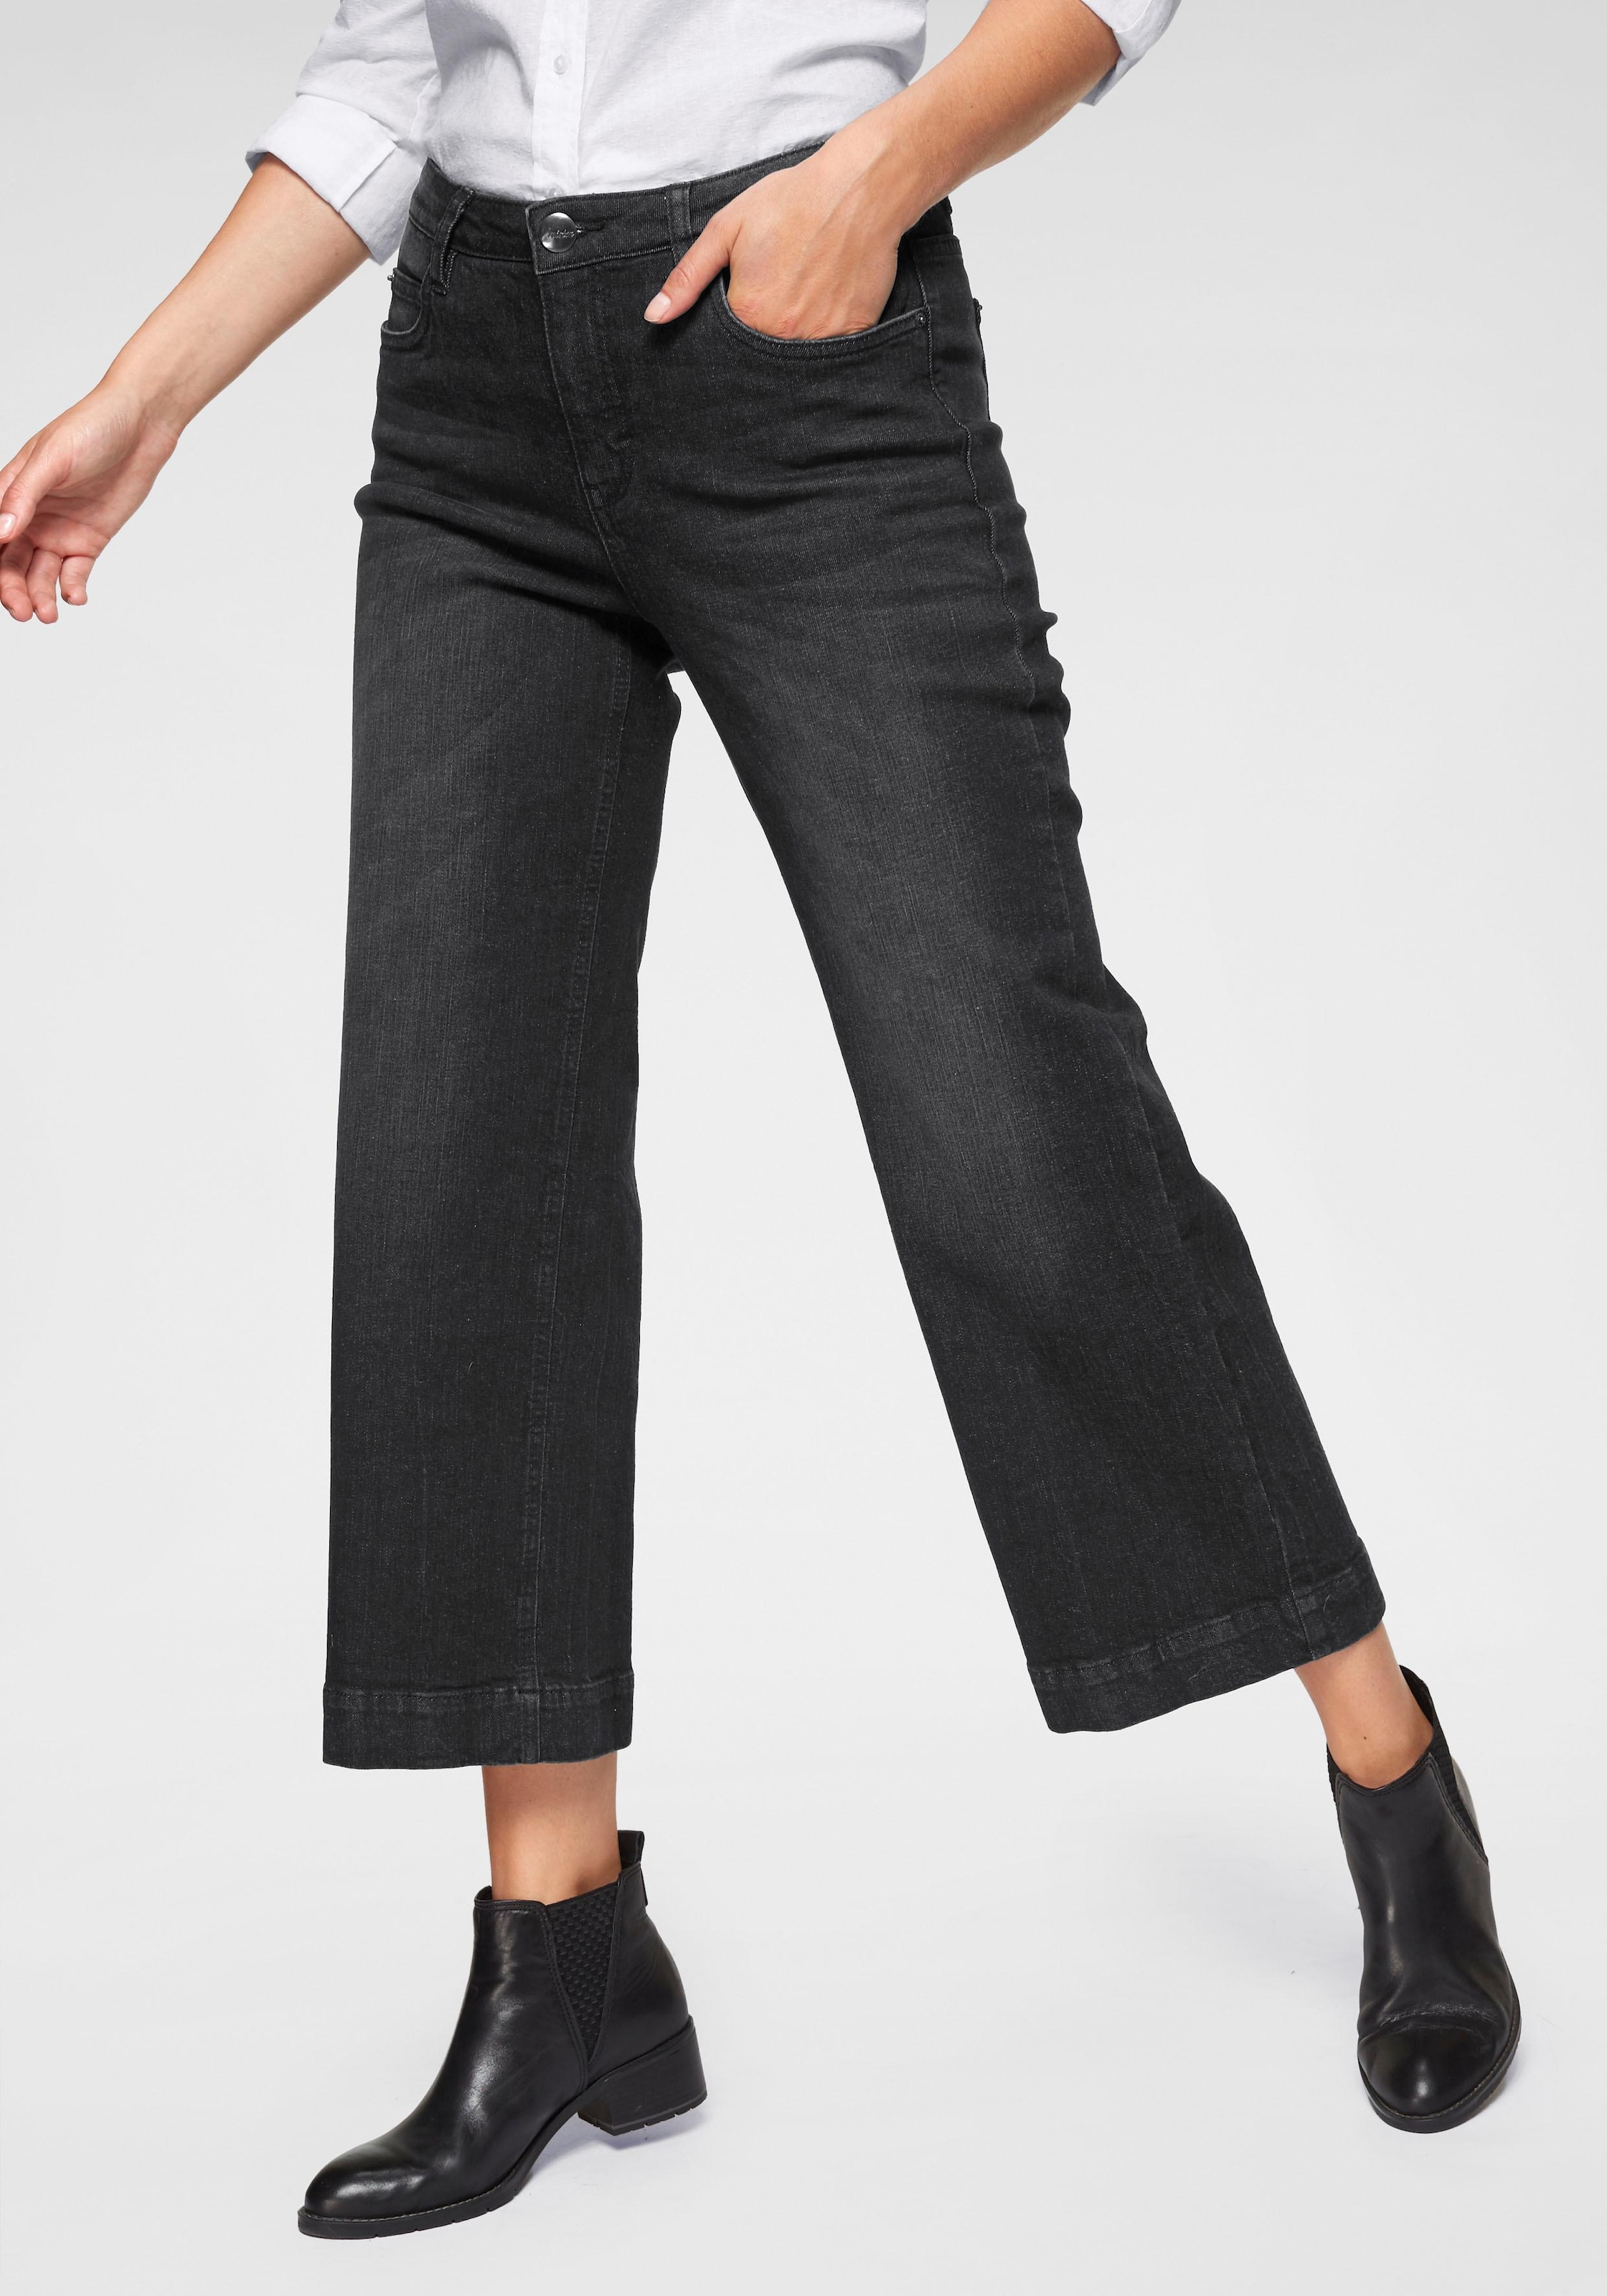 Aniston in | kaufen Used-Waschung BAUR 7/8-Jeans, CASUAL